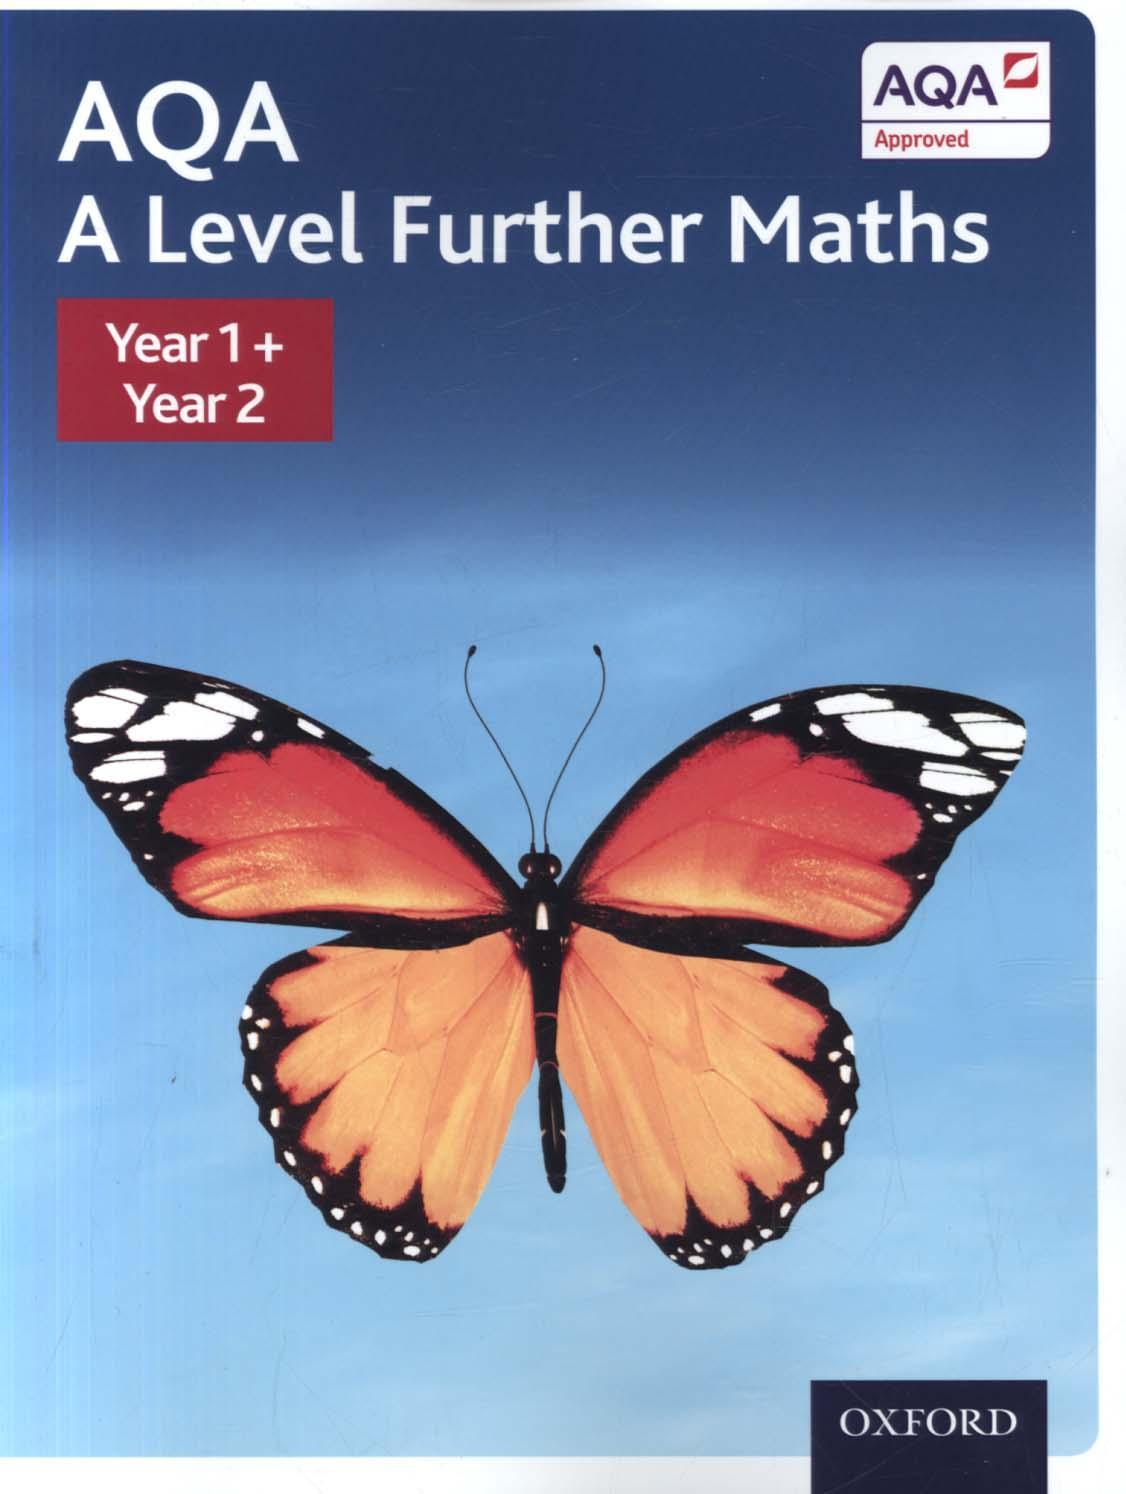 AQA A Level Further Maths: Year 1 + Year 2 Student Book